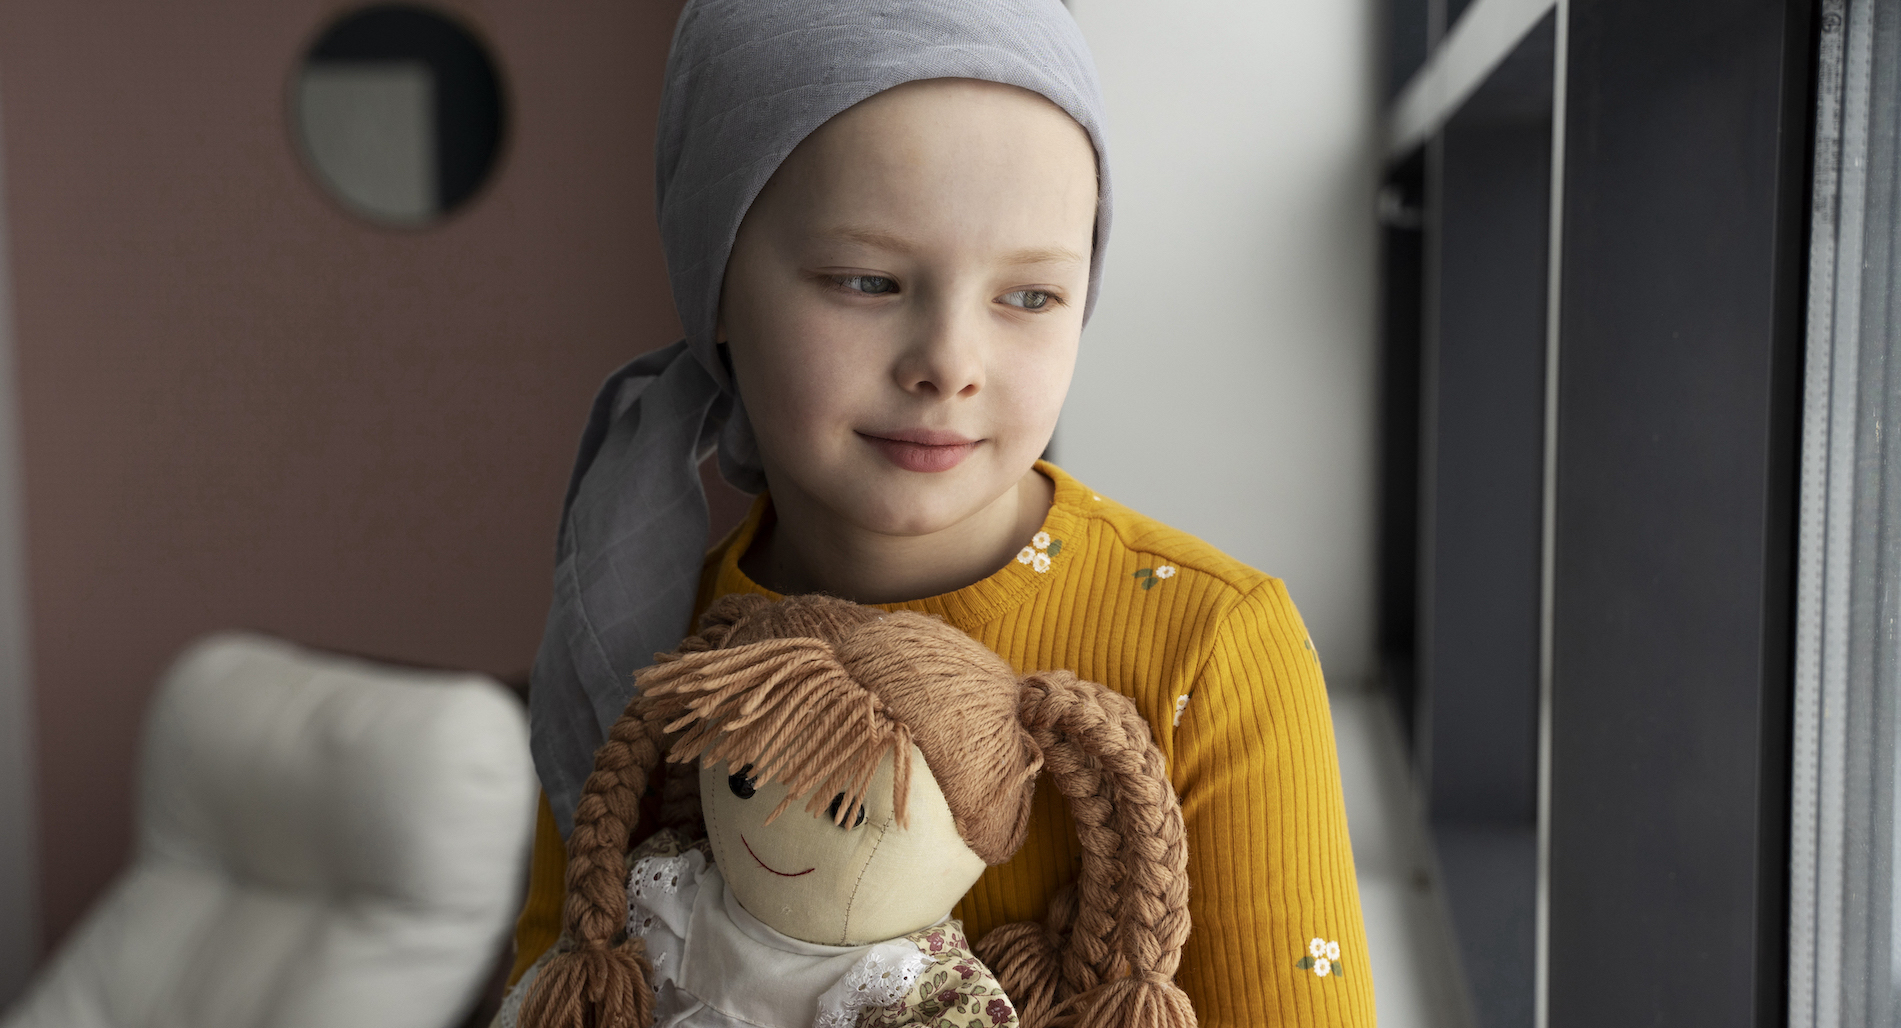 Young child in therapy for battling cancer. Image by Freepik.